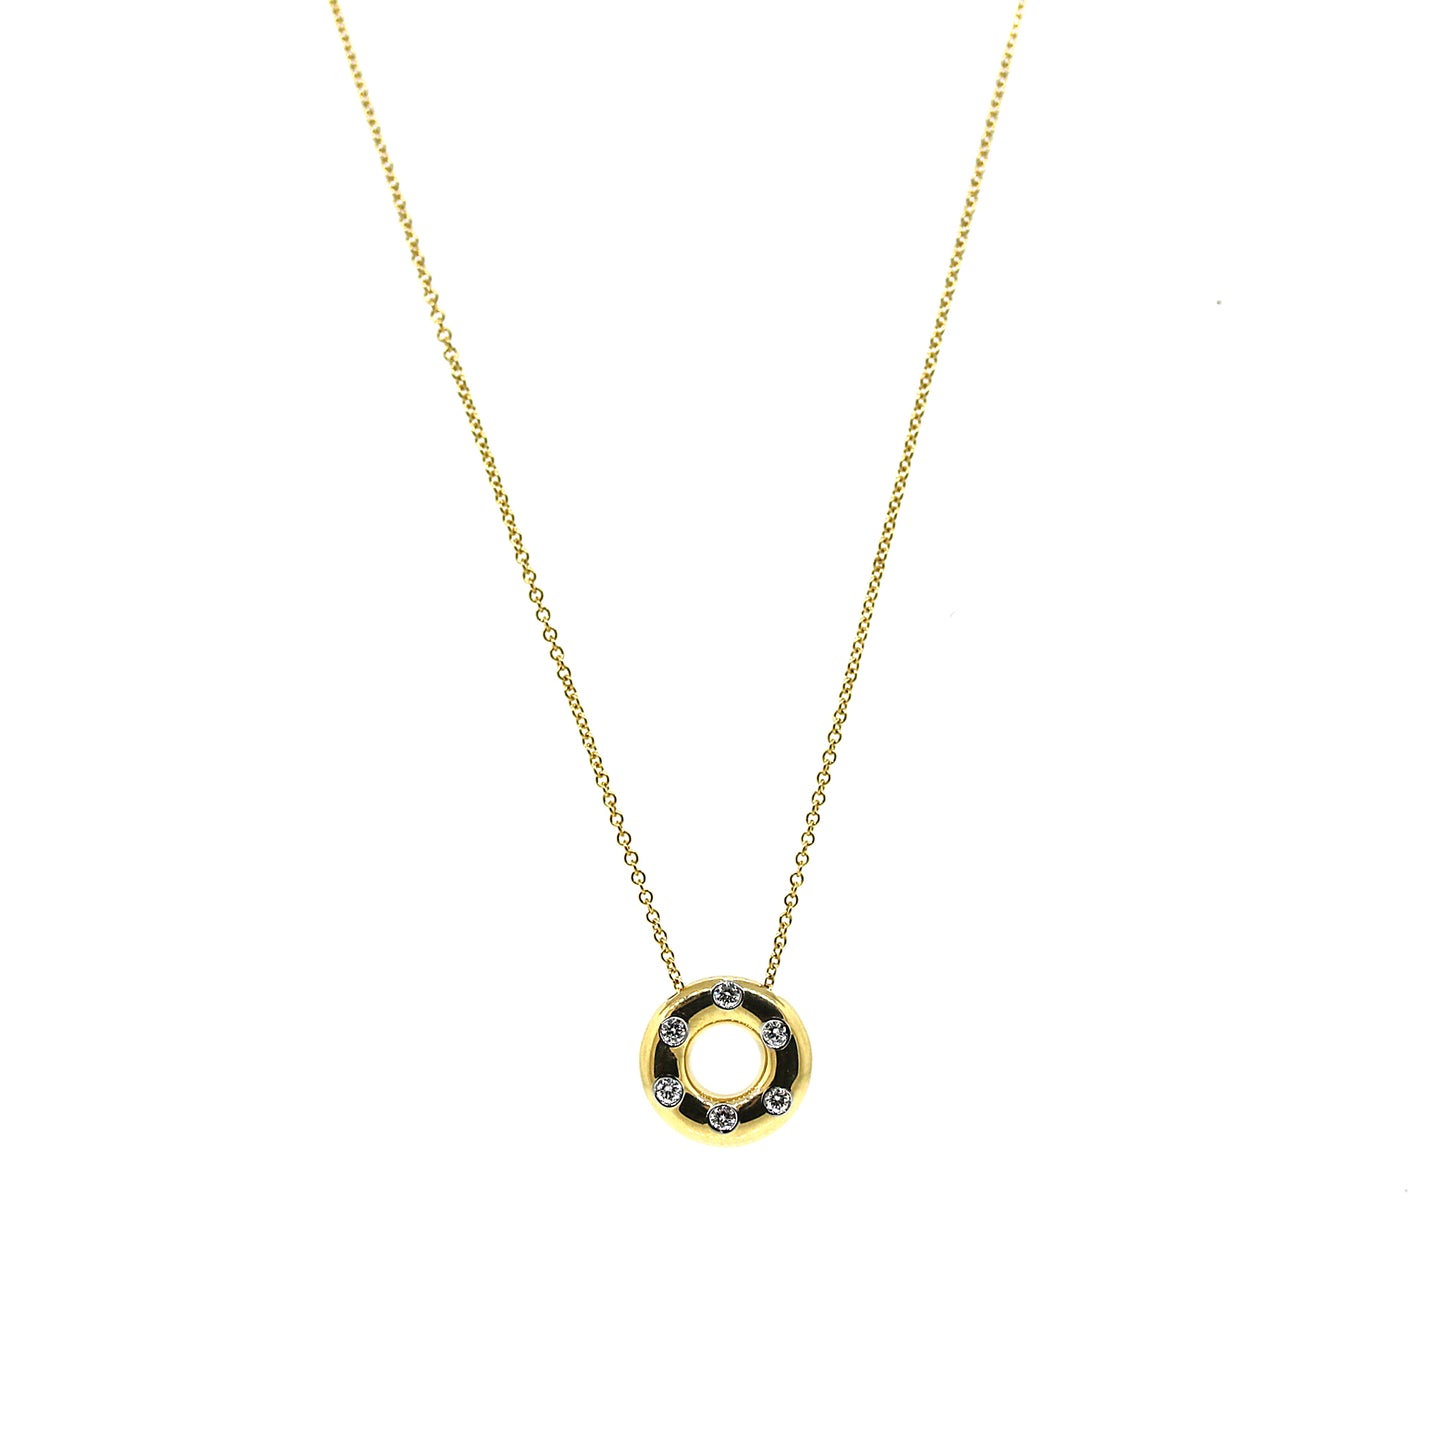 Preowned Tiffany and Co. Etoile Donut Charm Diamond Pendant Necklace